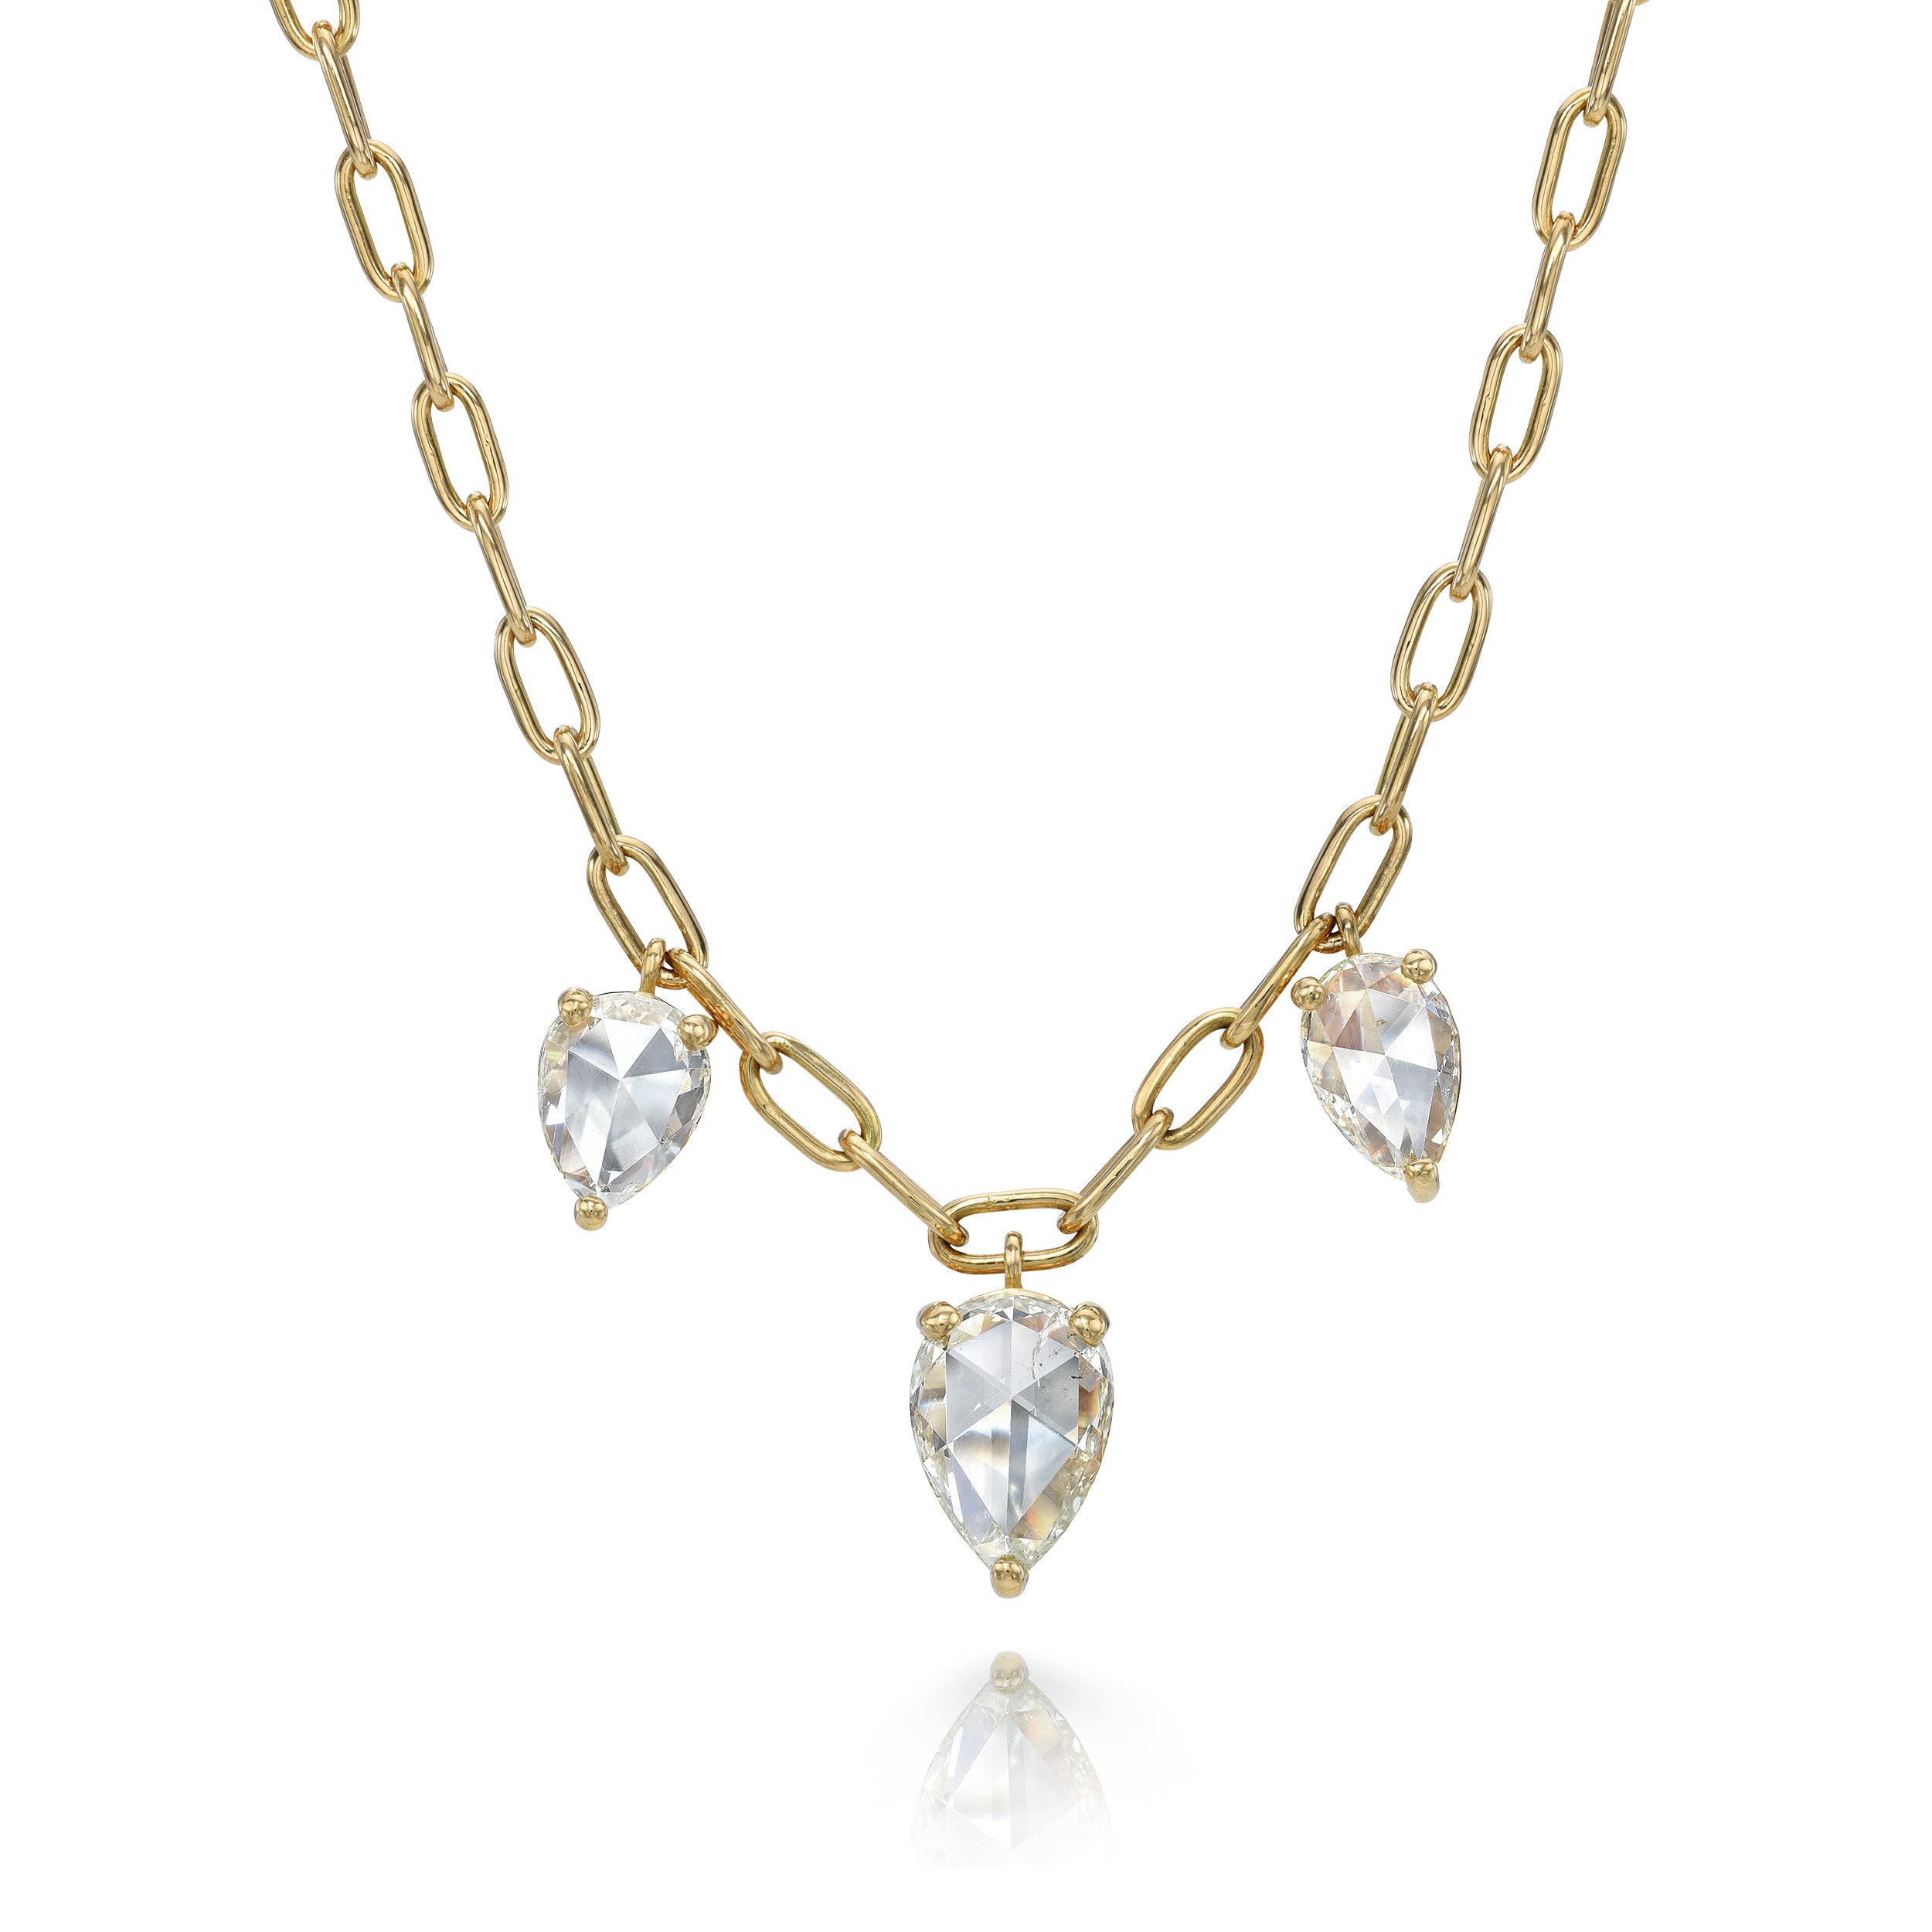 SINGLE STONE THREE STONE CAILYN NECKLACE featuring 4.12ctw O-P/VS-I1 pear shaped rose cut diamonds prong set on a handcrafted 18K yellow gold pendant necklace. Necklace measures 17".